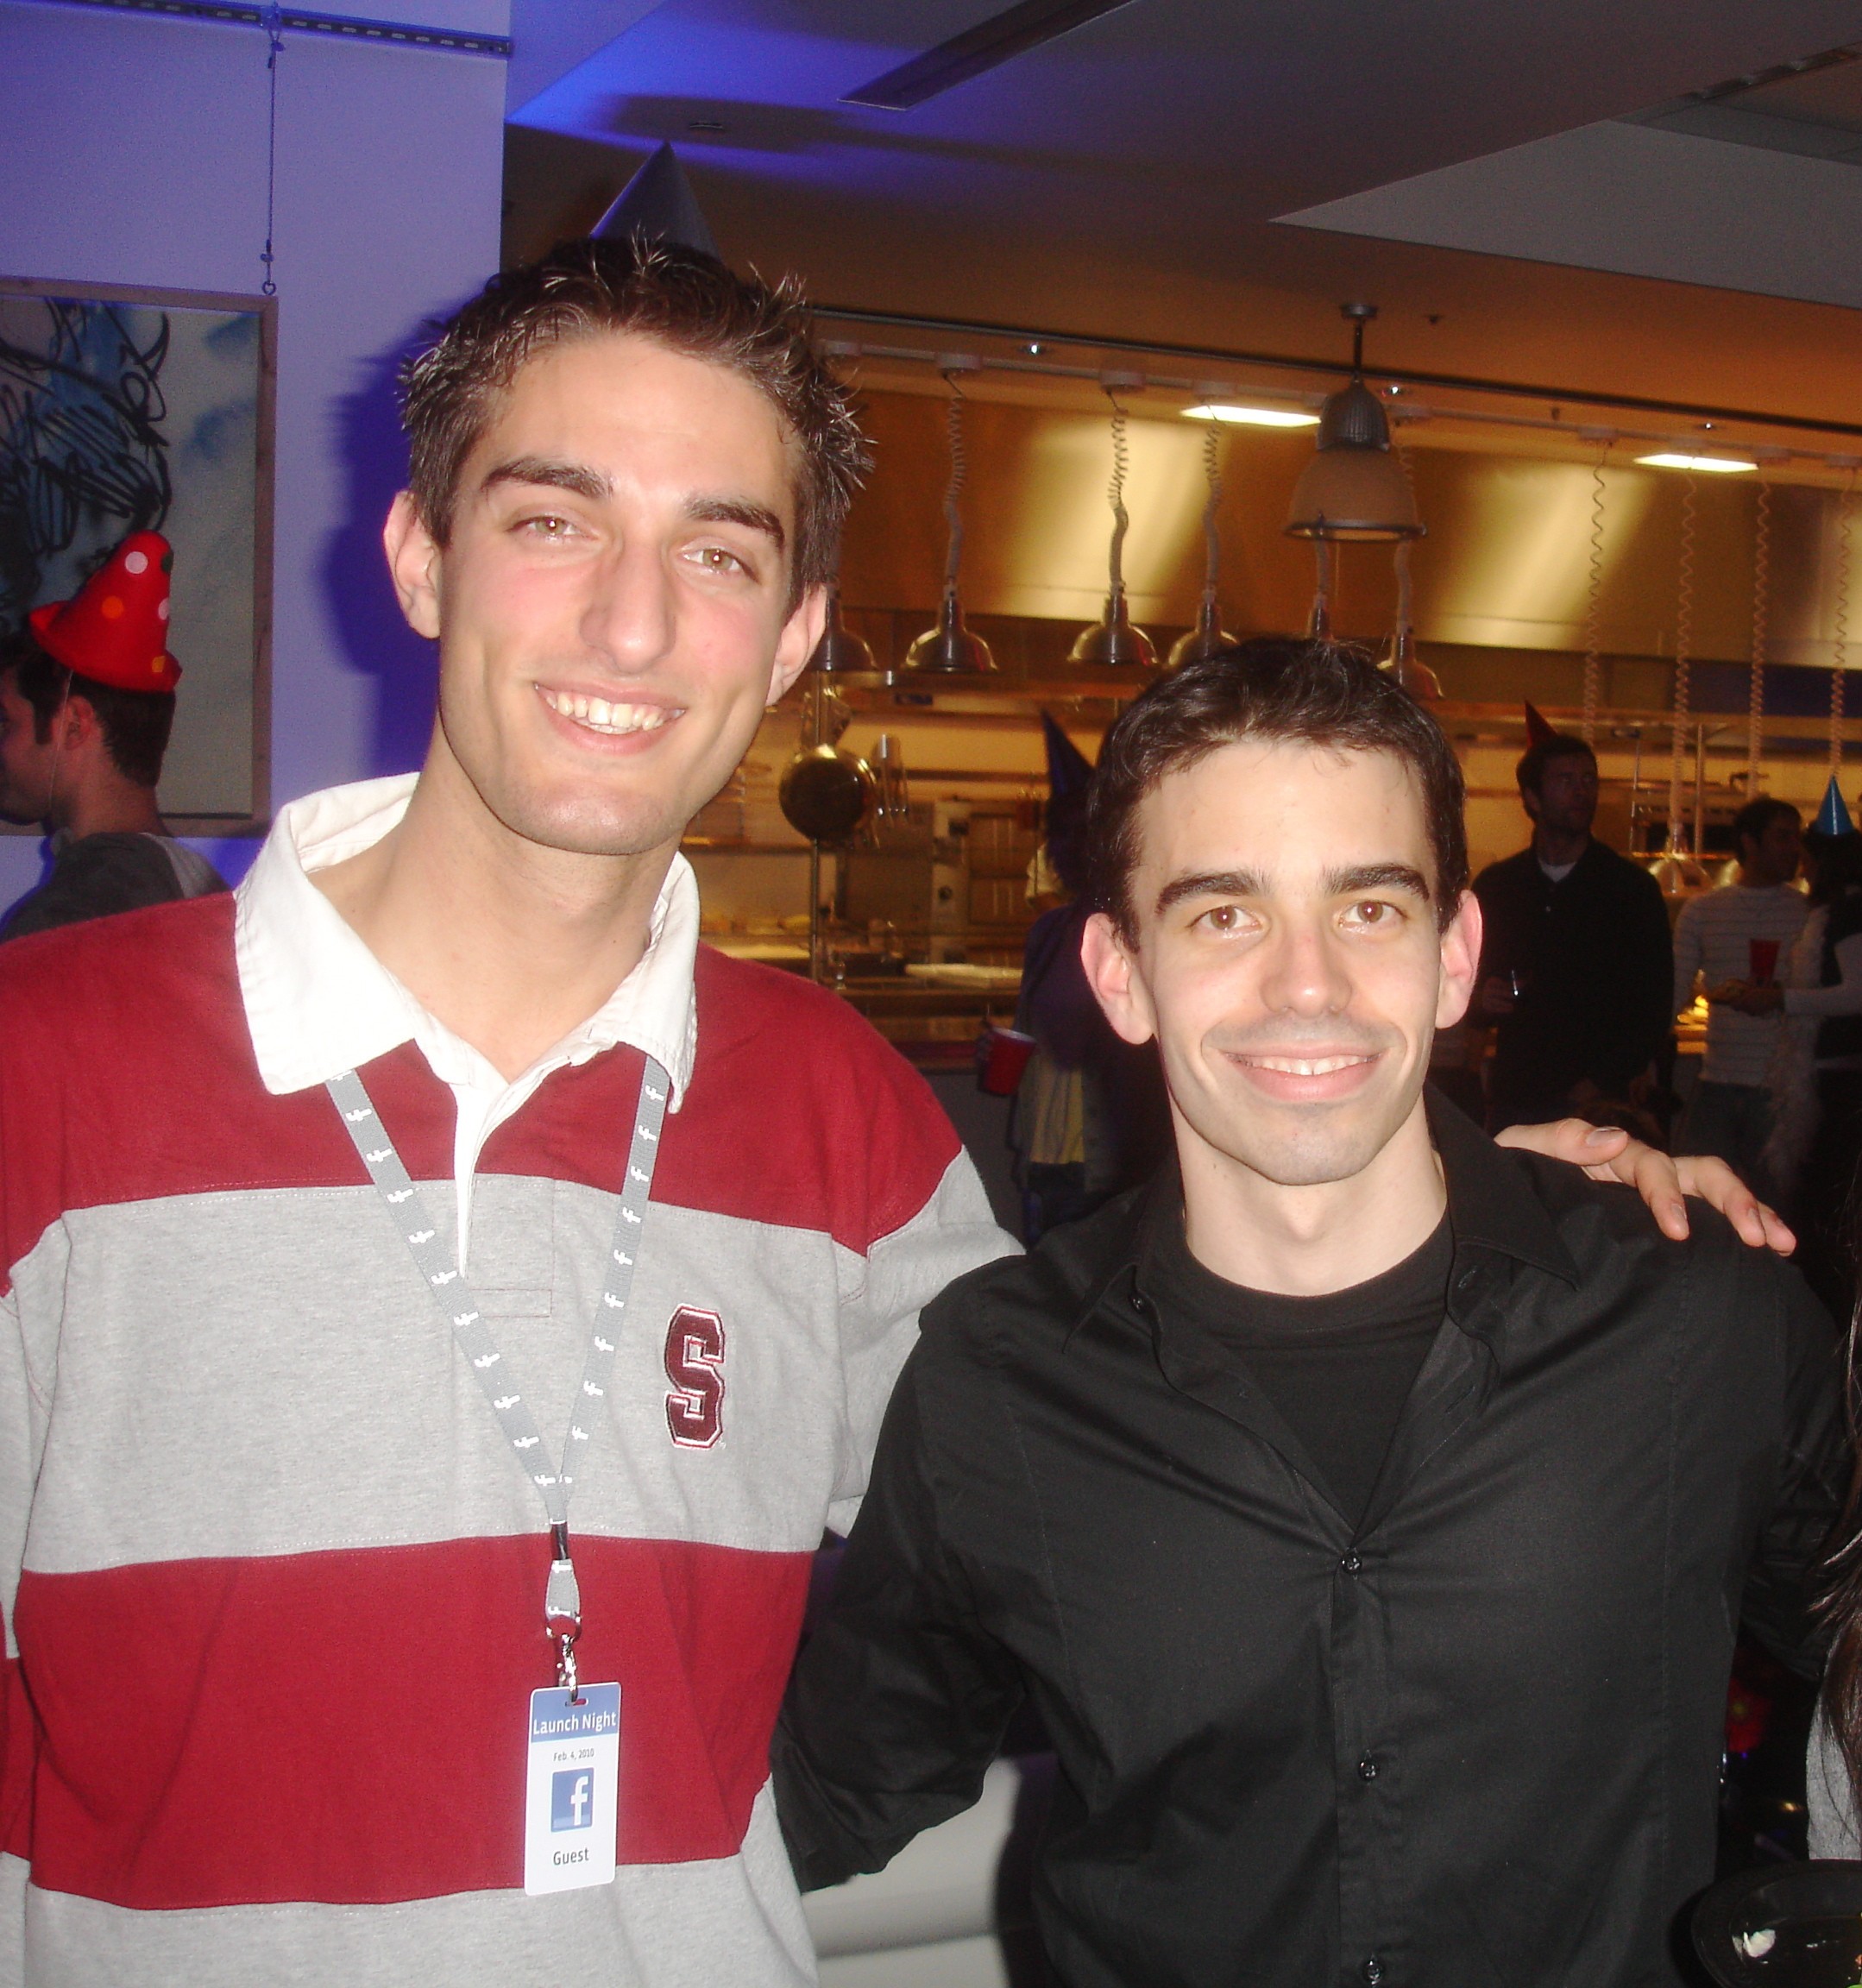 Me with Blake Ross, Firefox cofounder, at Facebook Launch Night